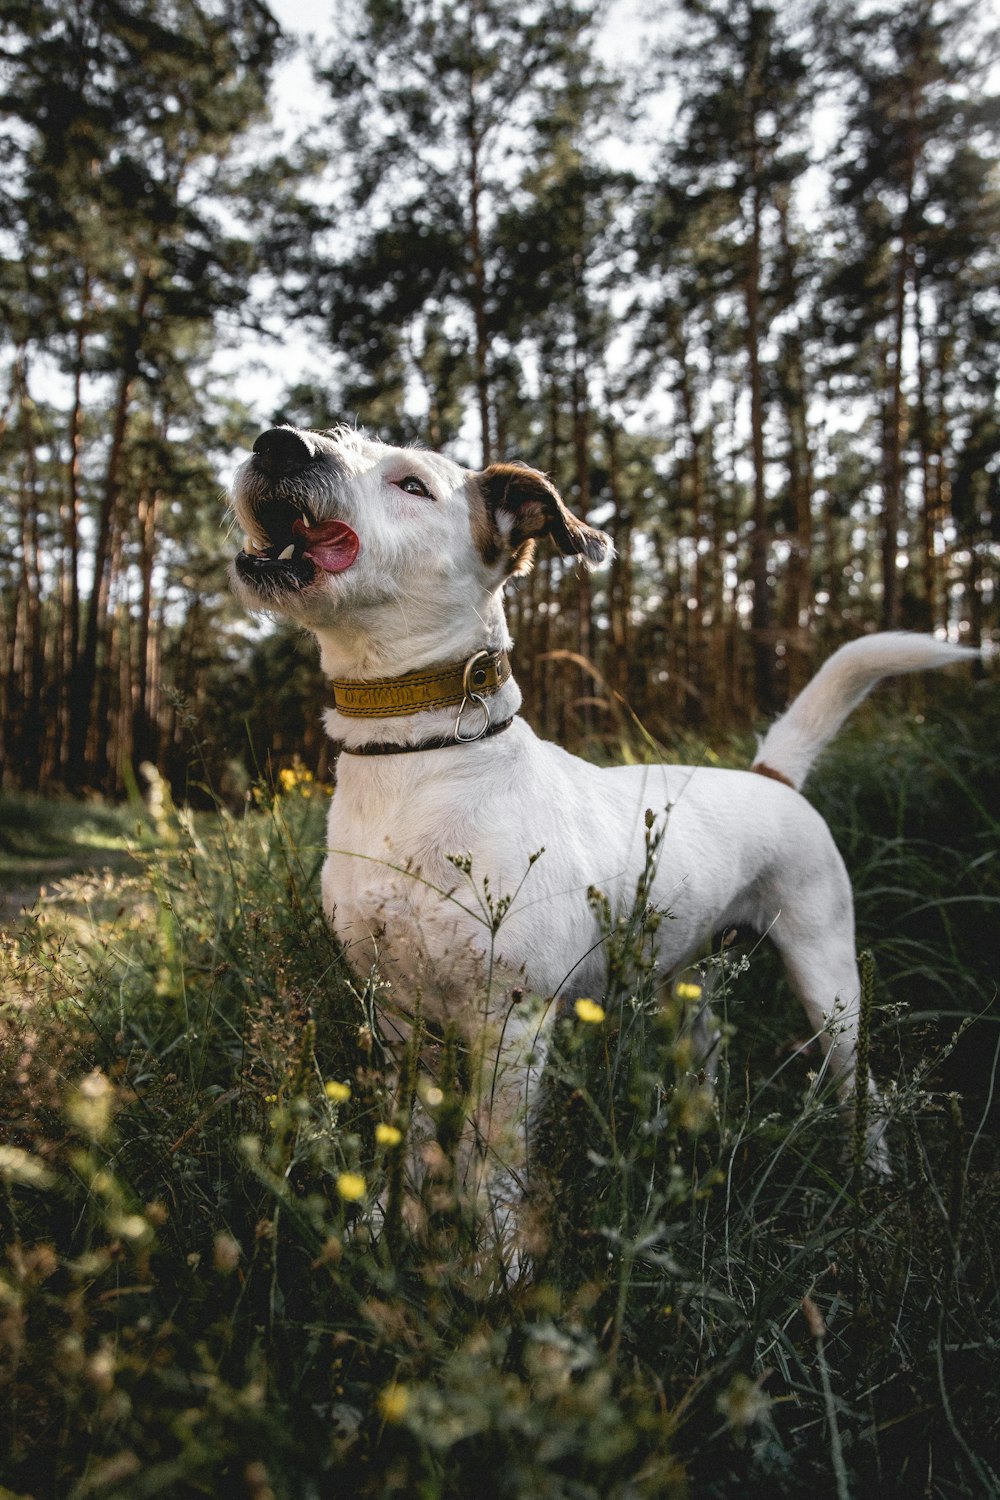 a white dog standing in a field of tall grass